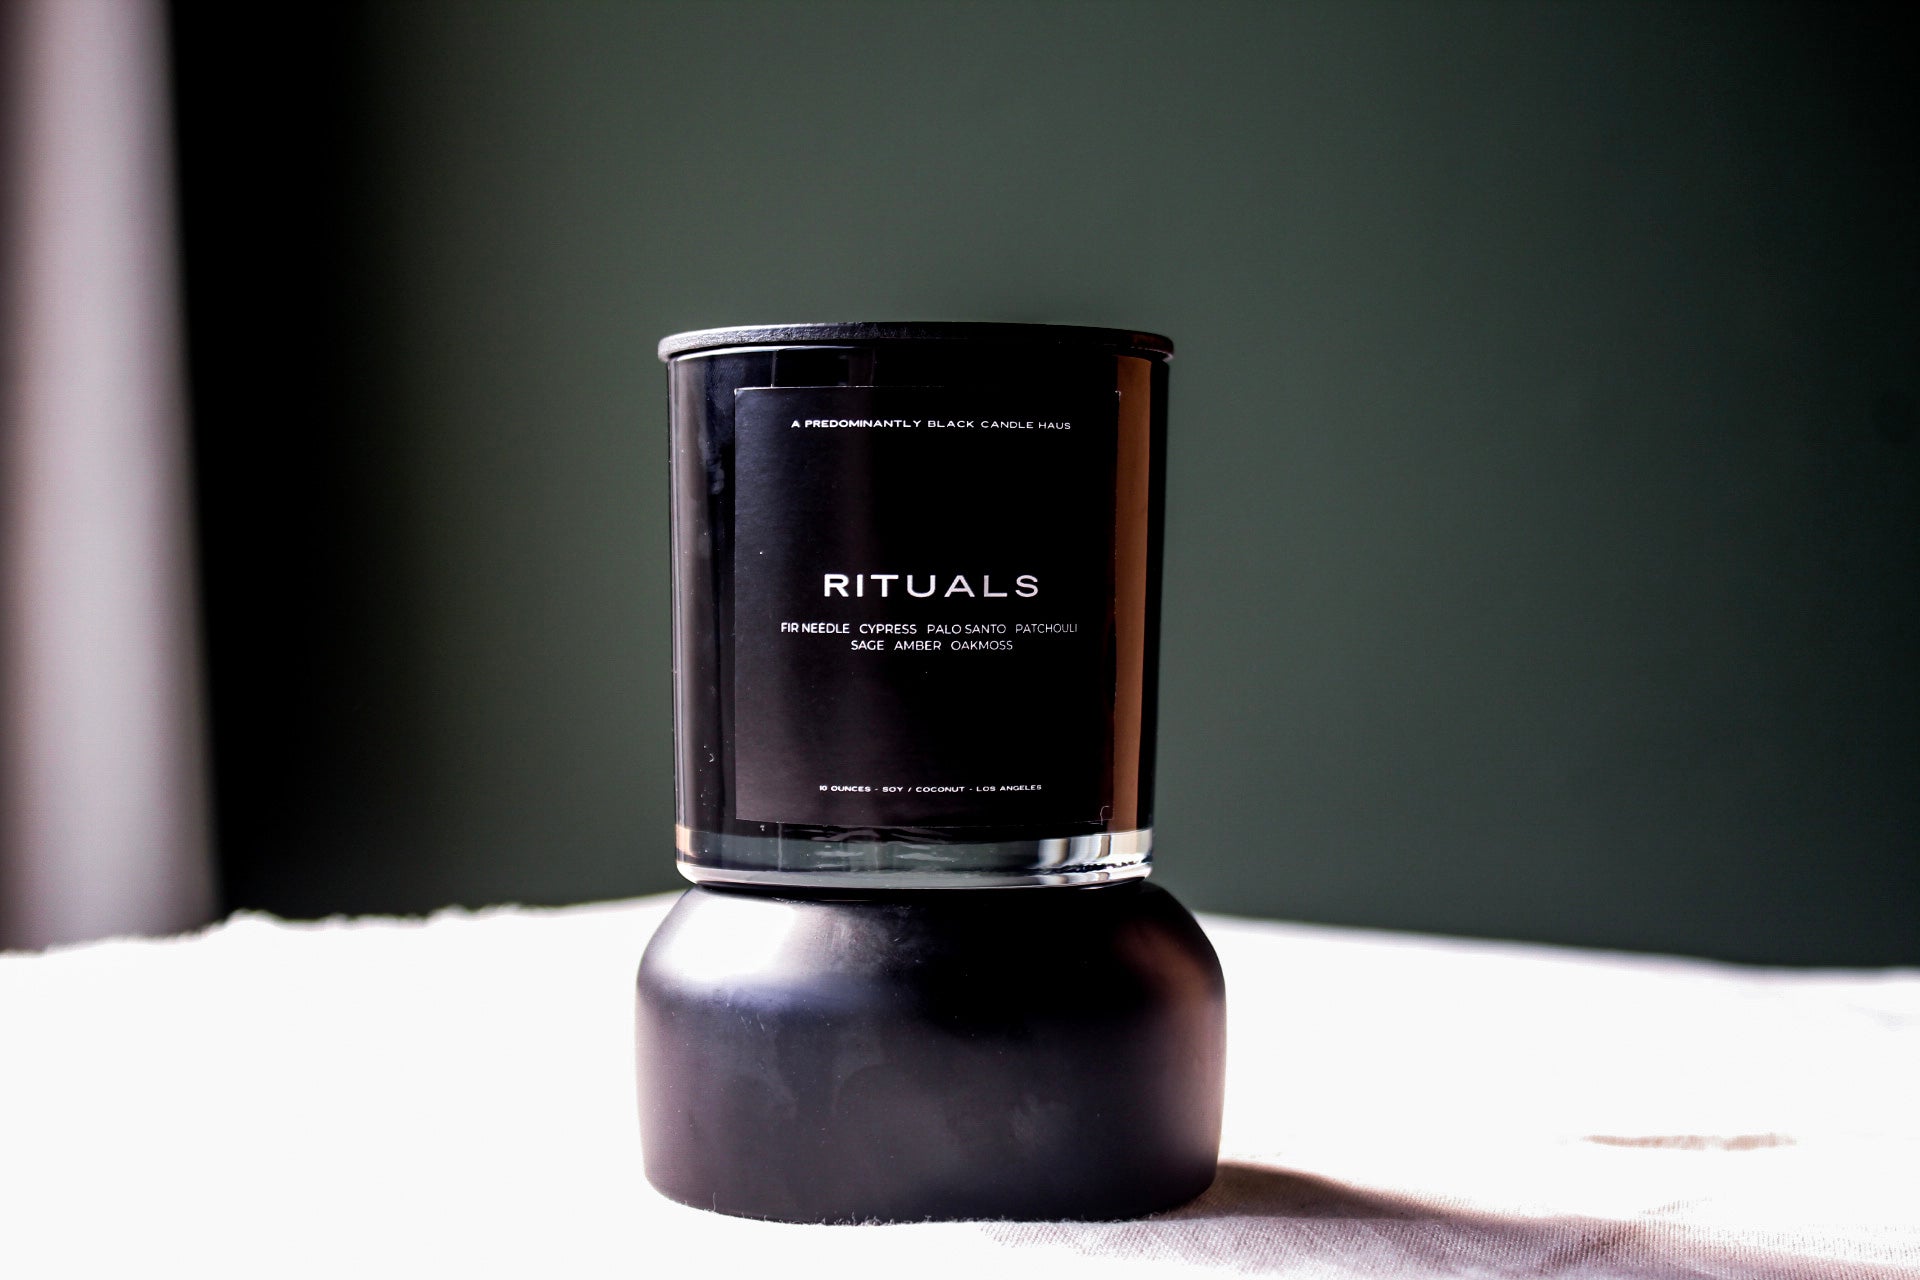 A Predominantly Black branded candle displayed against a predominantly black background, evoking an atmosphere of calm and serenity.